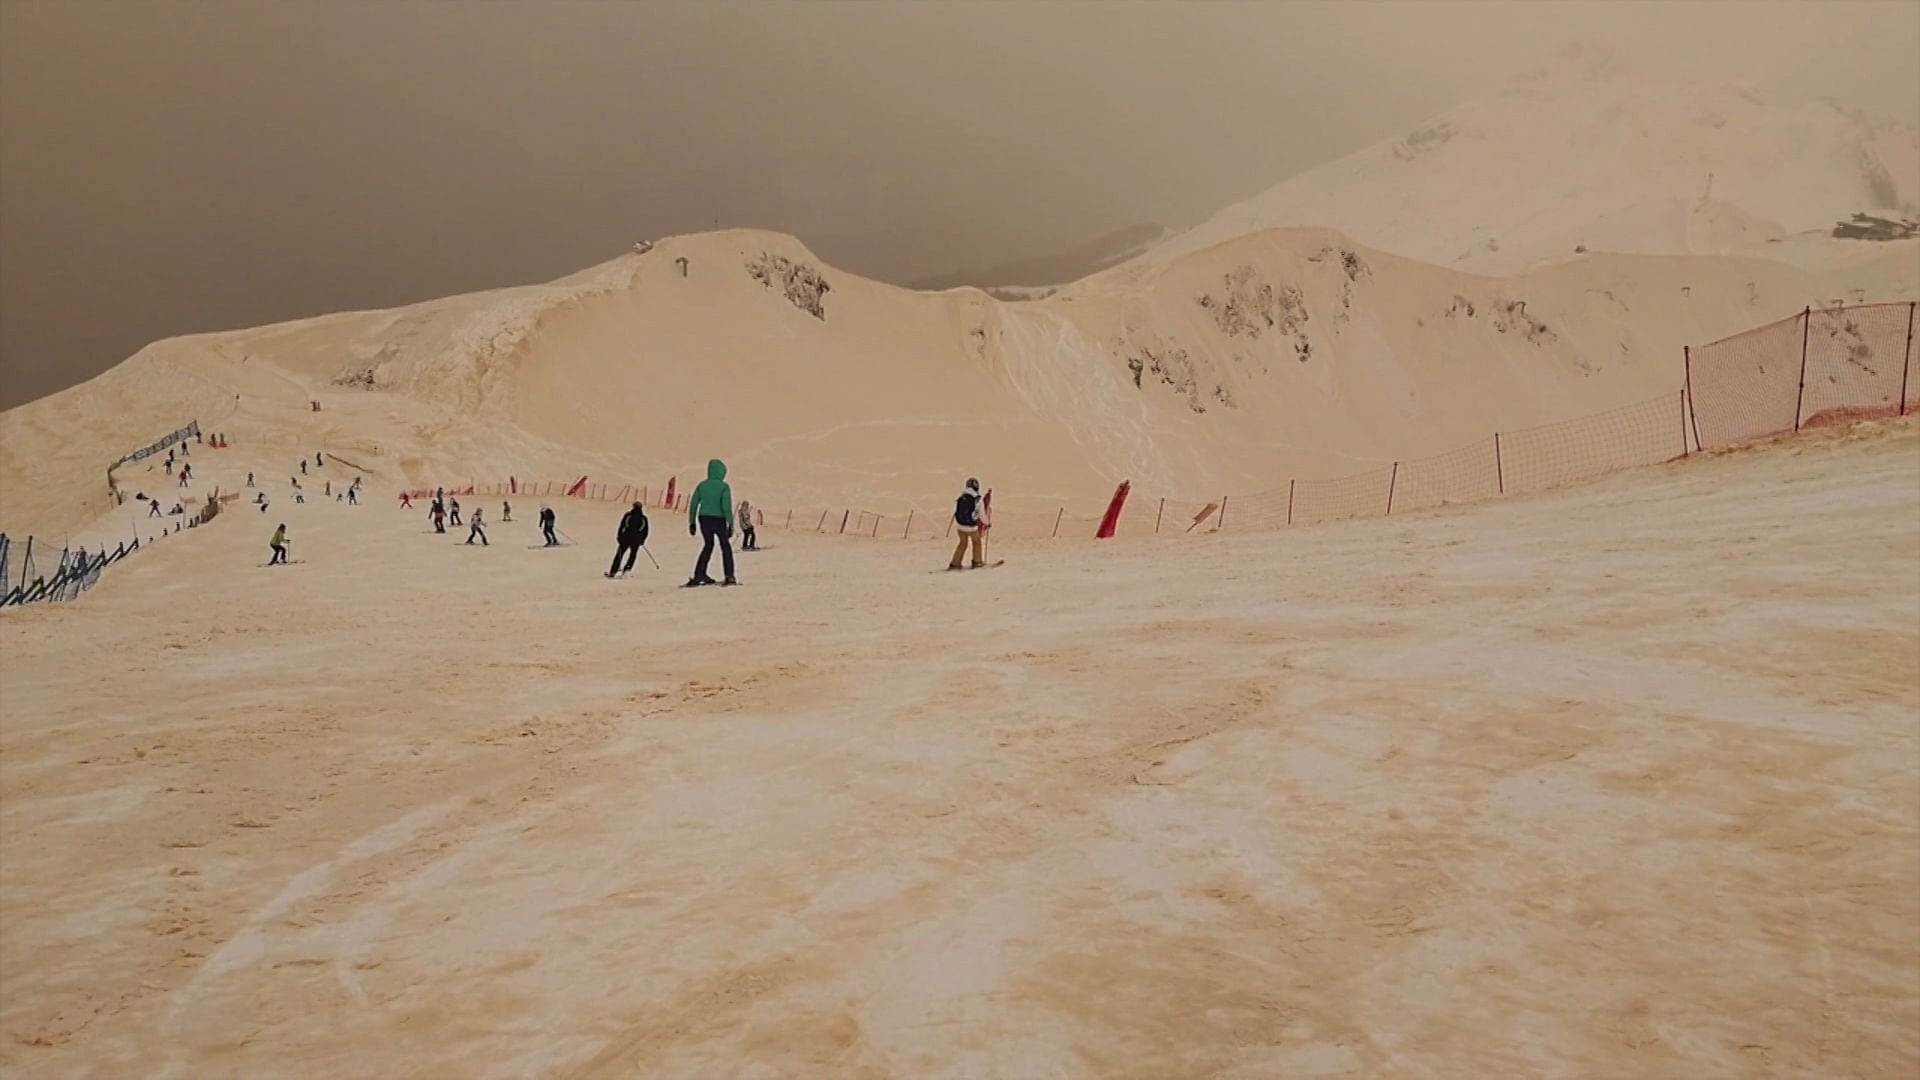 Skiers in Russia were in for a surprise when they saw their usual white slopes turn orange.